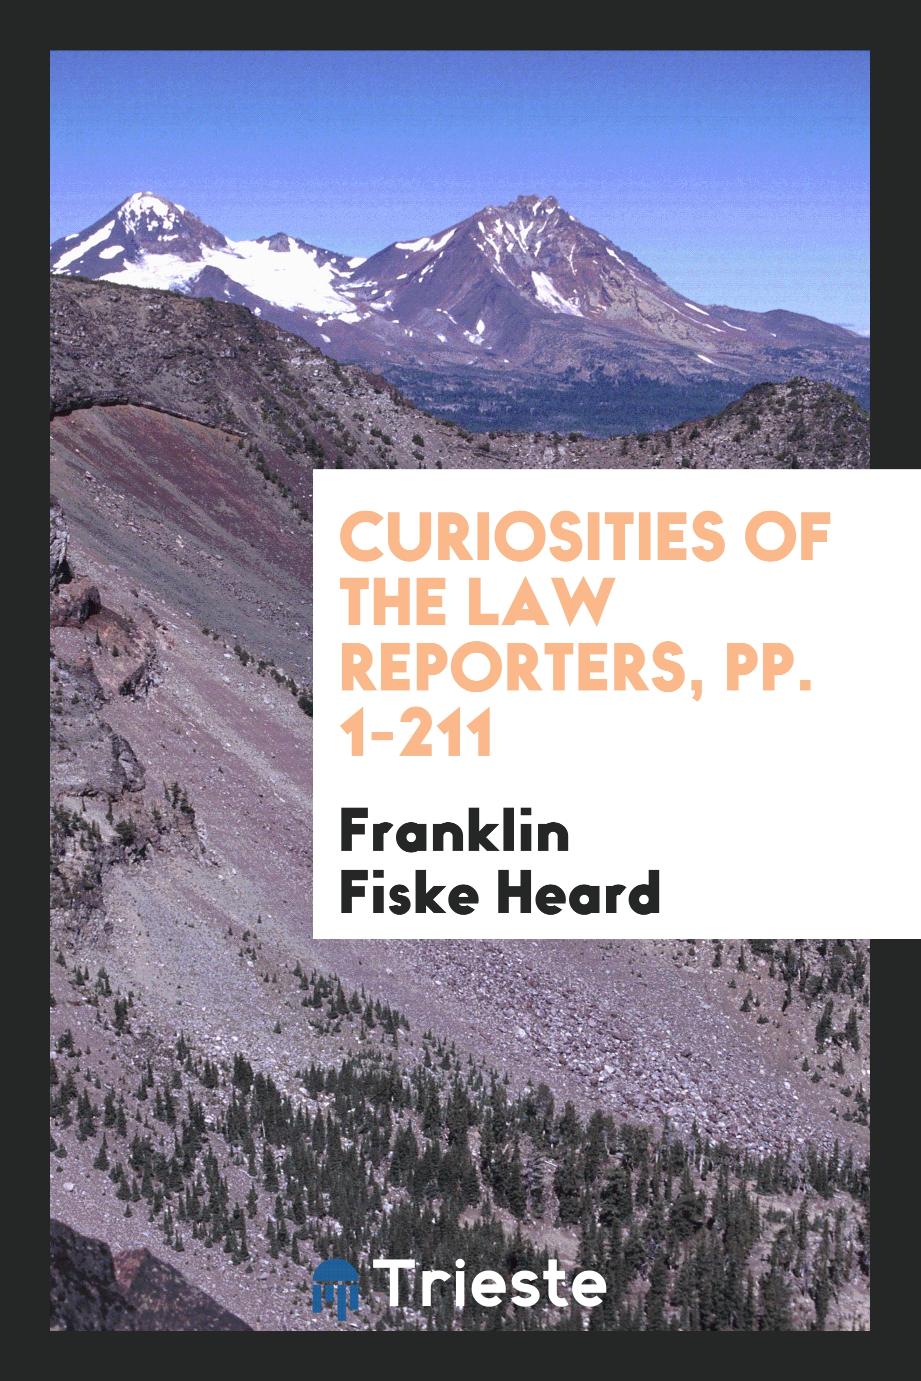 Curiosities of the Law Reporters, pp. 1-211